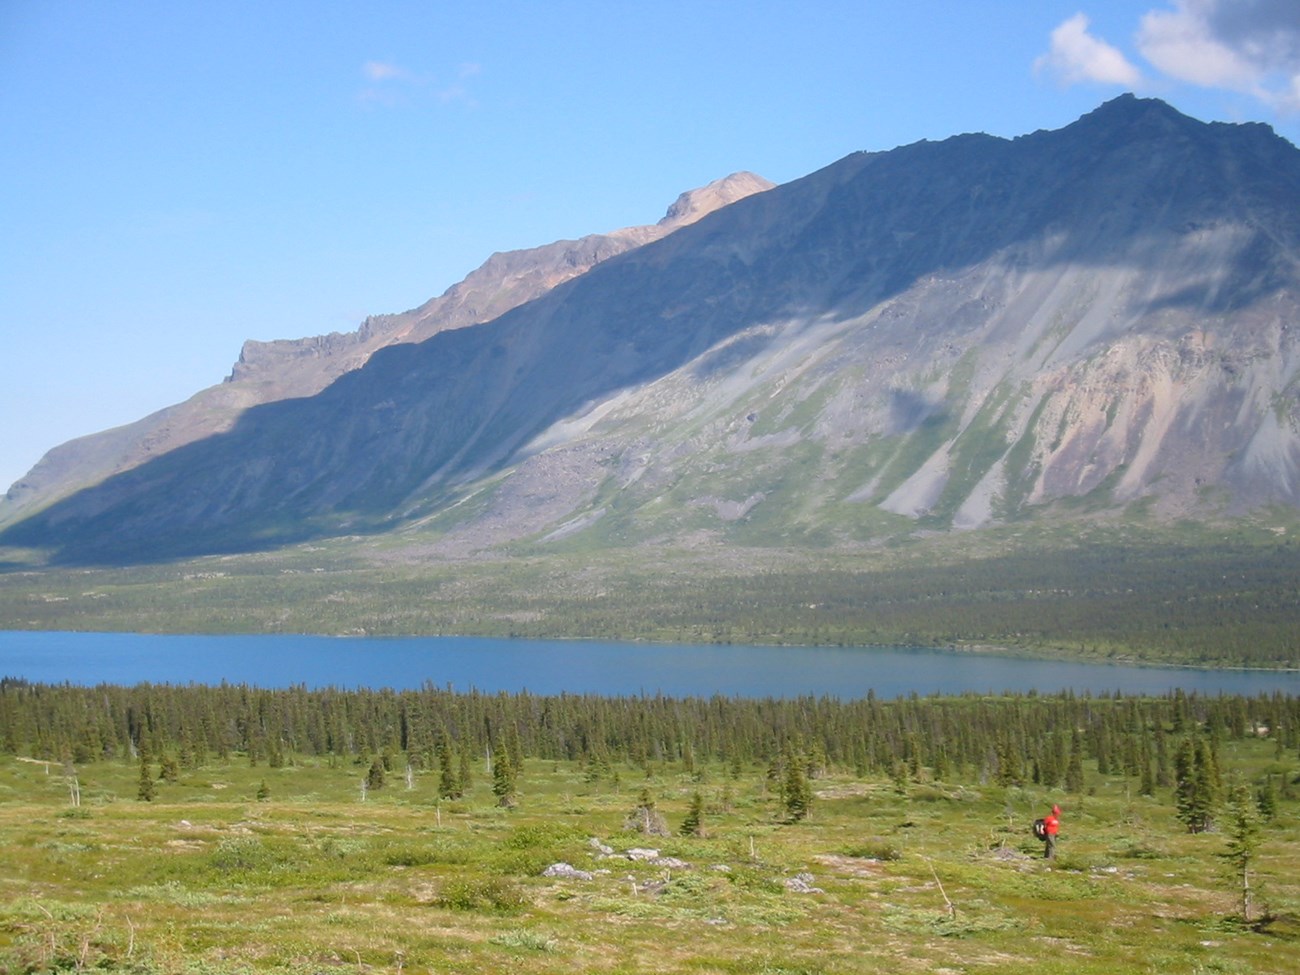 Image of person hiking above a forest hillside with a lake and mountains in the background.